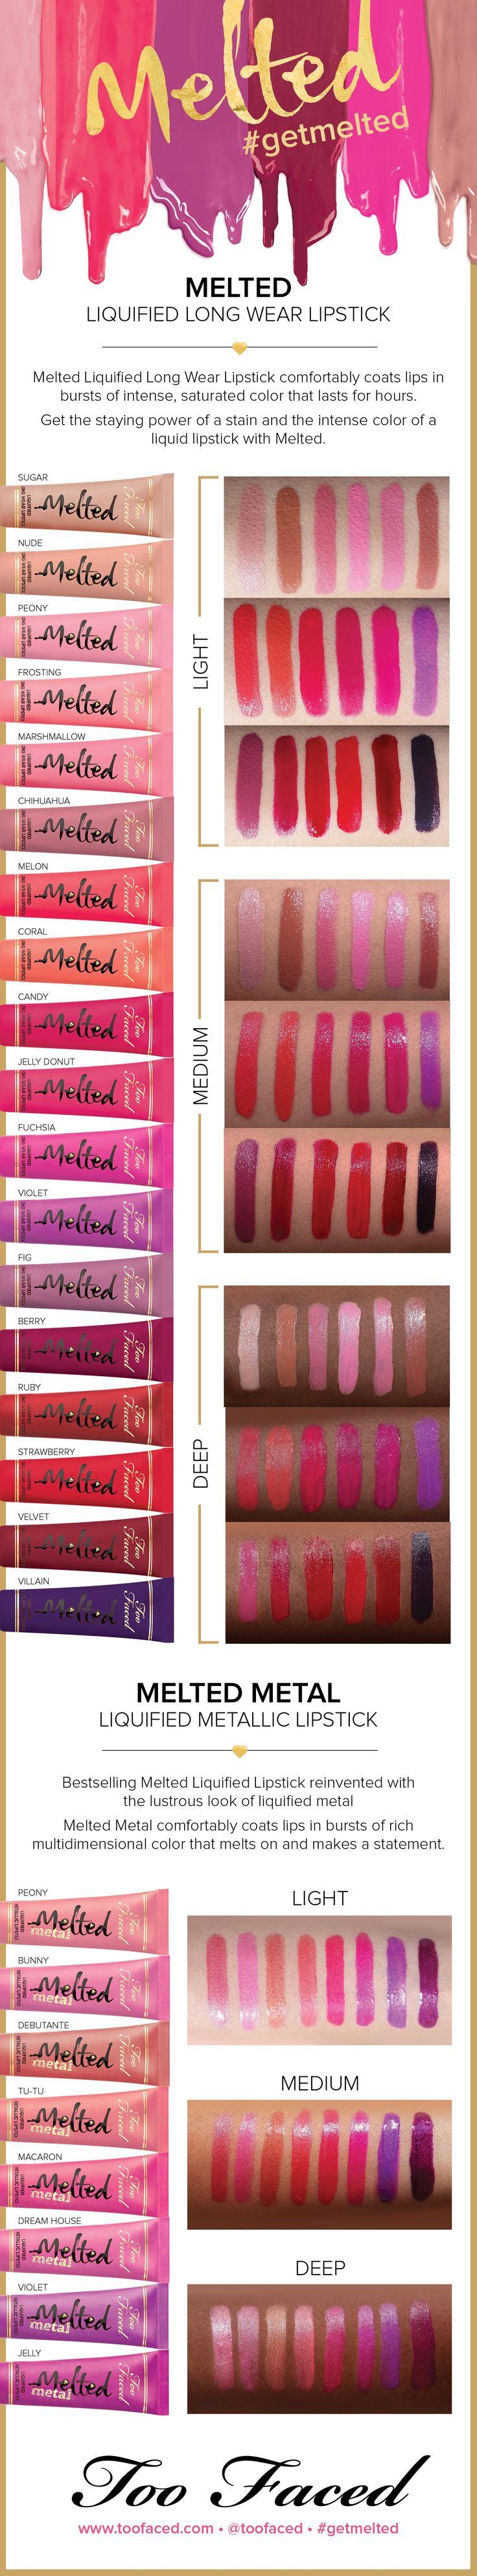 Wedding - Make Up Swatches And Dupes